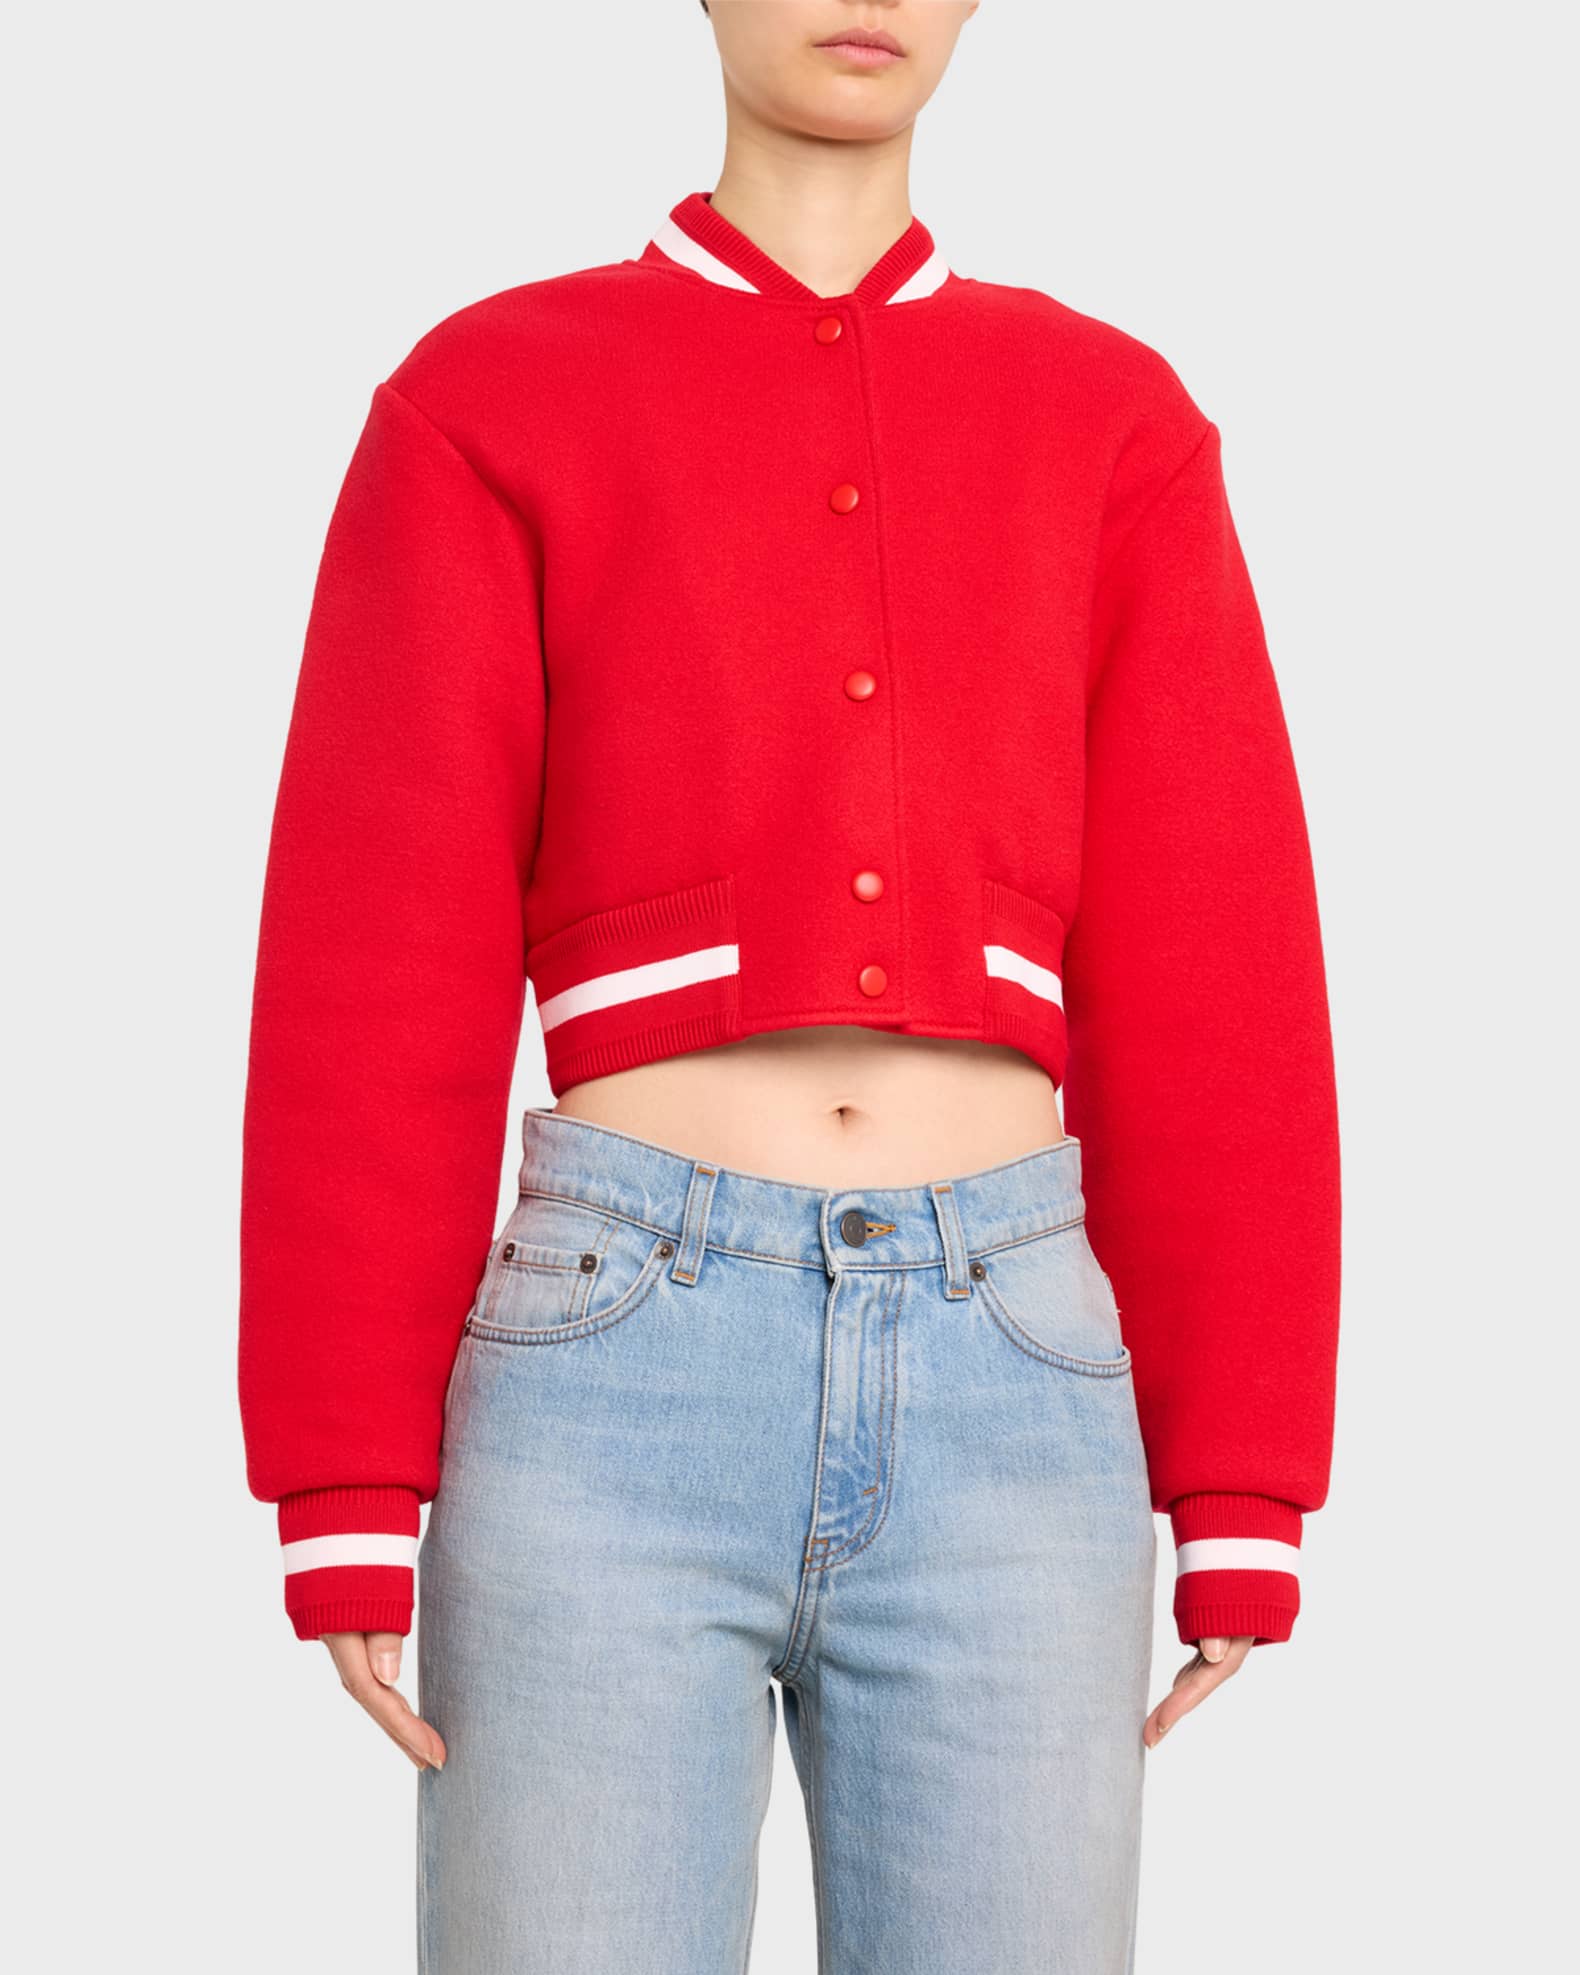 Givenchy Logo-Embroidered Crop Wool Bomber Varsity Jacket | Neiman Marcus